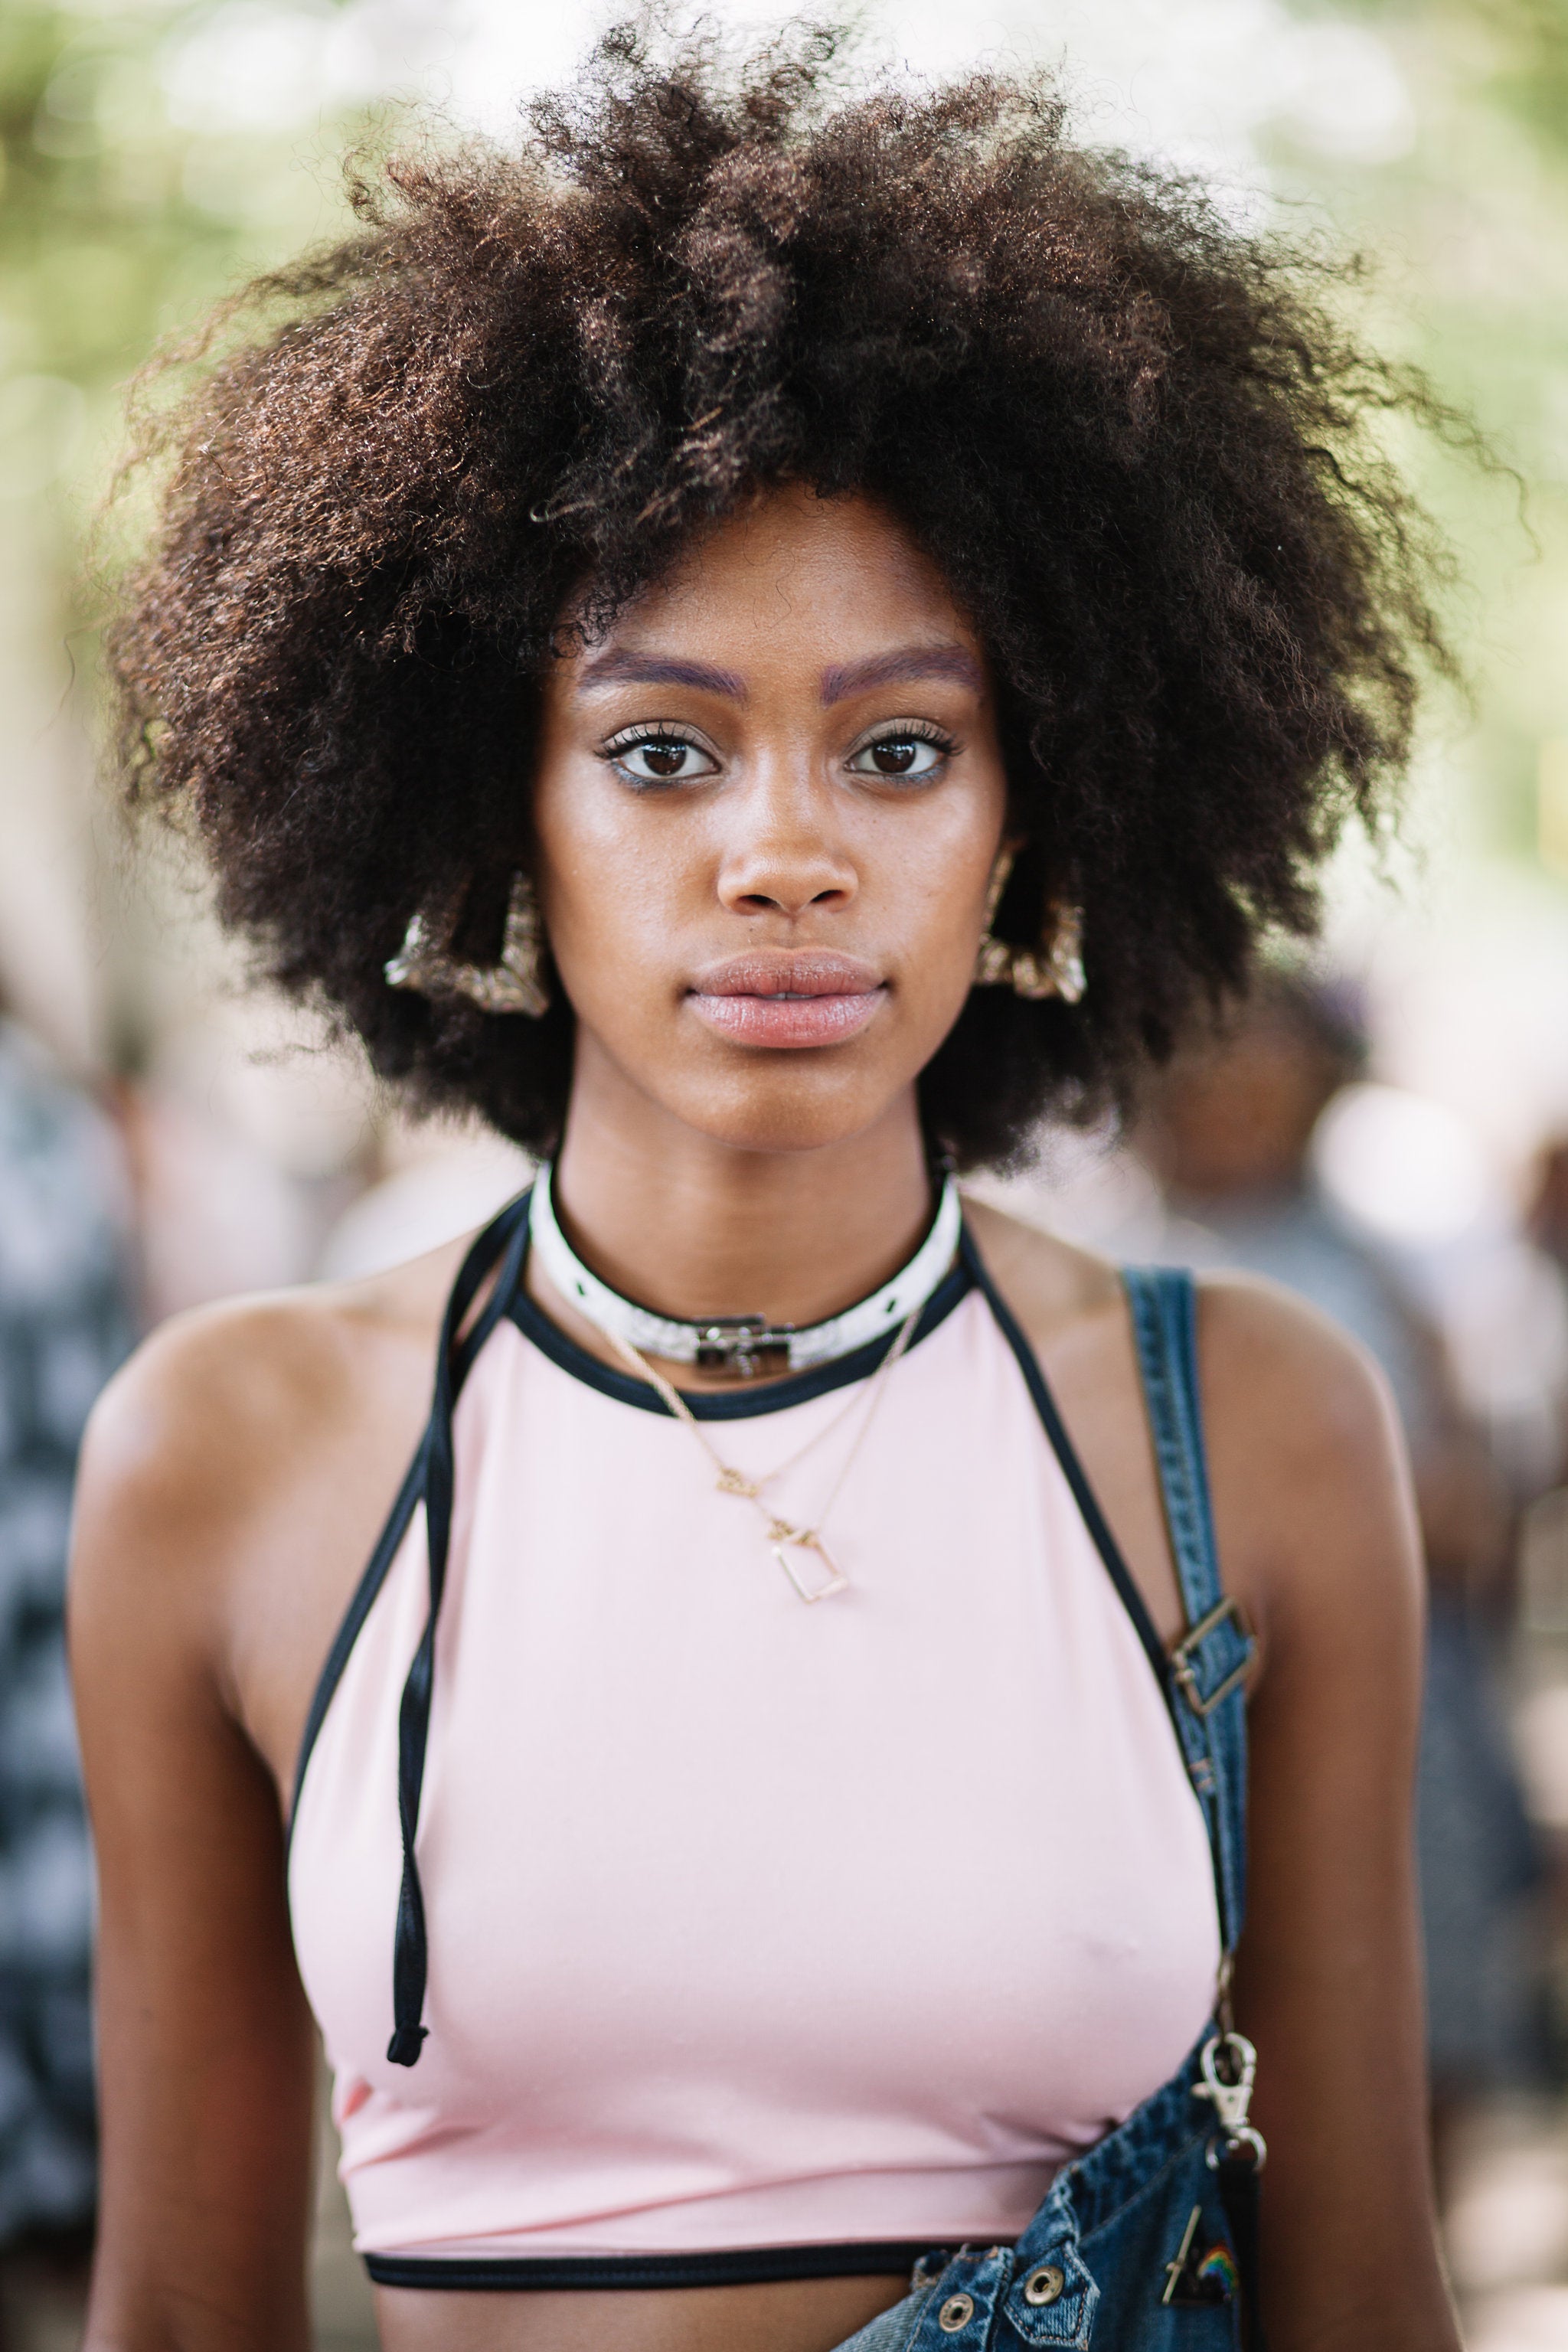 All The Most Glorious Hairstyles at AFROPUNK
